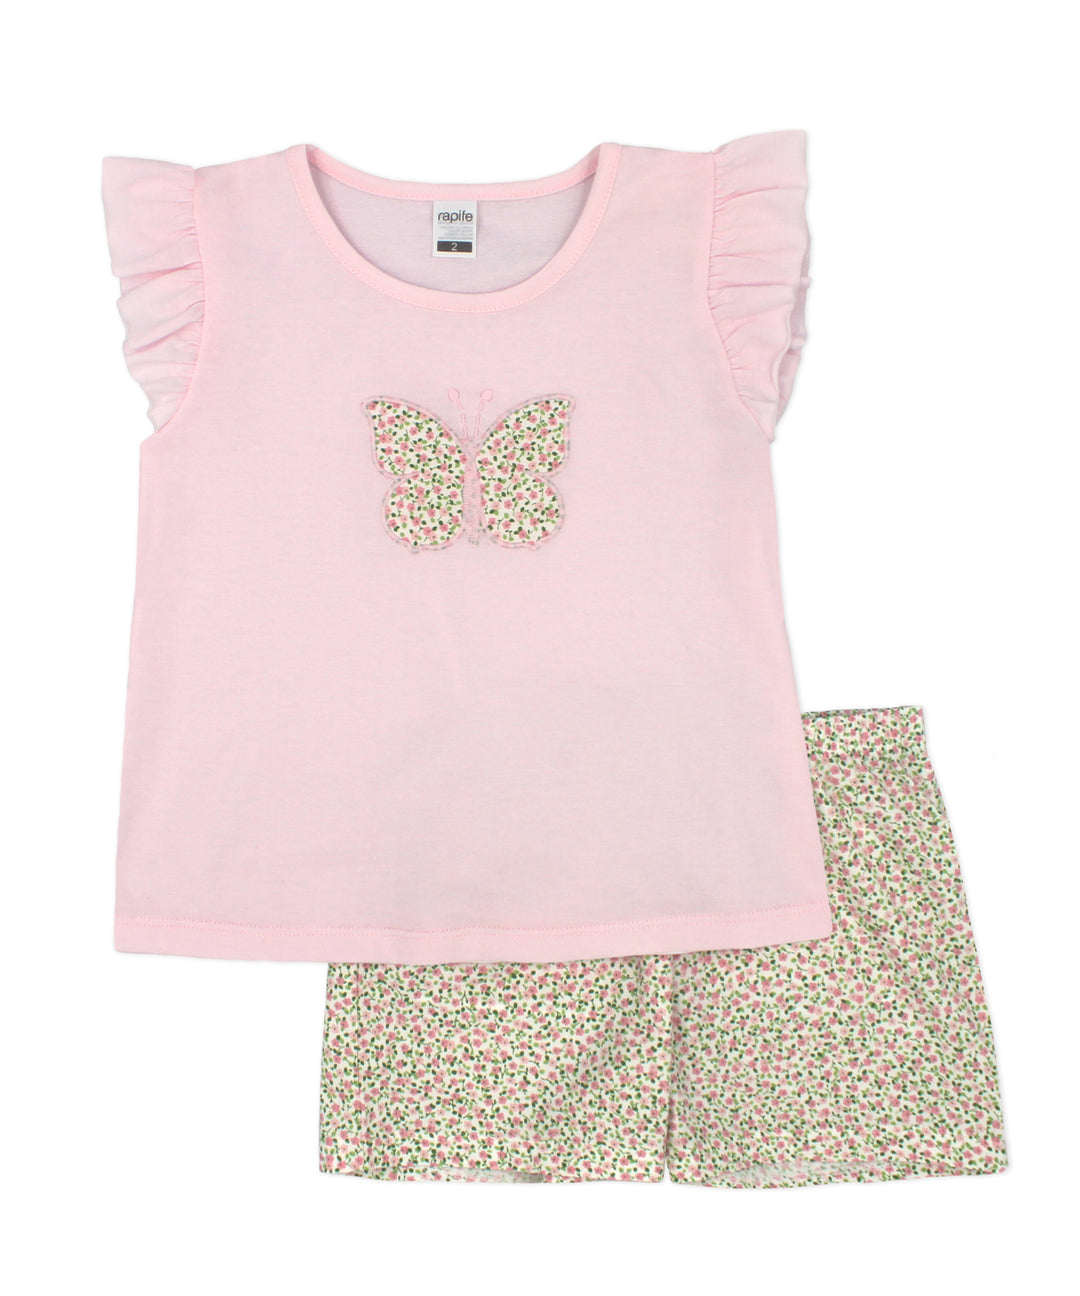 Rapife Butterfly Top & Shorts Set